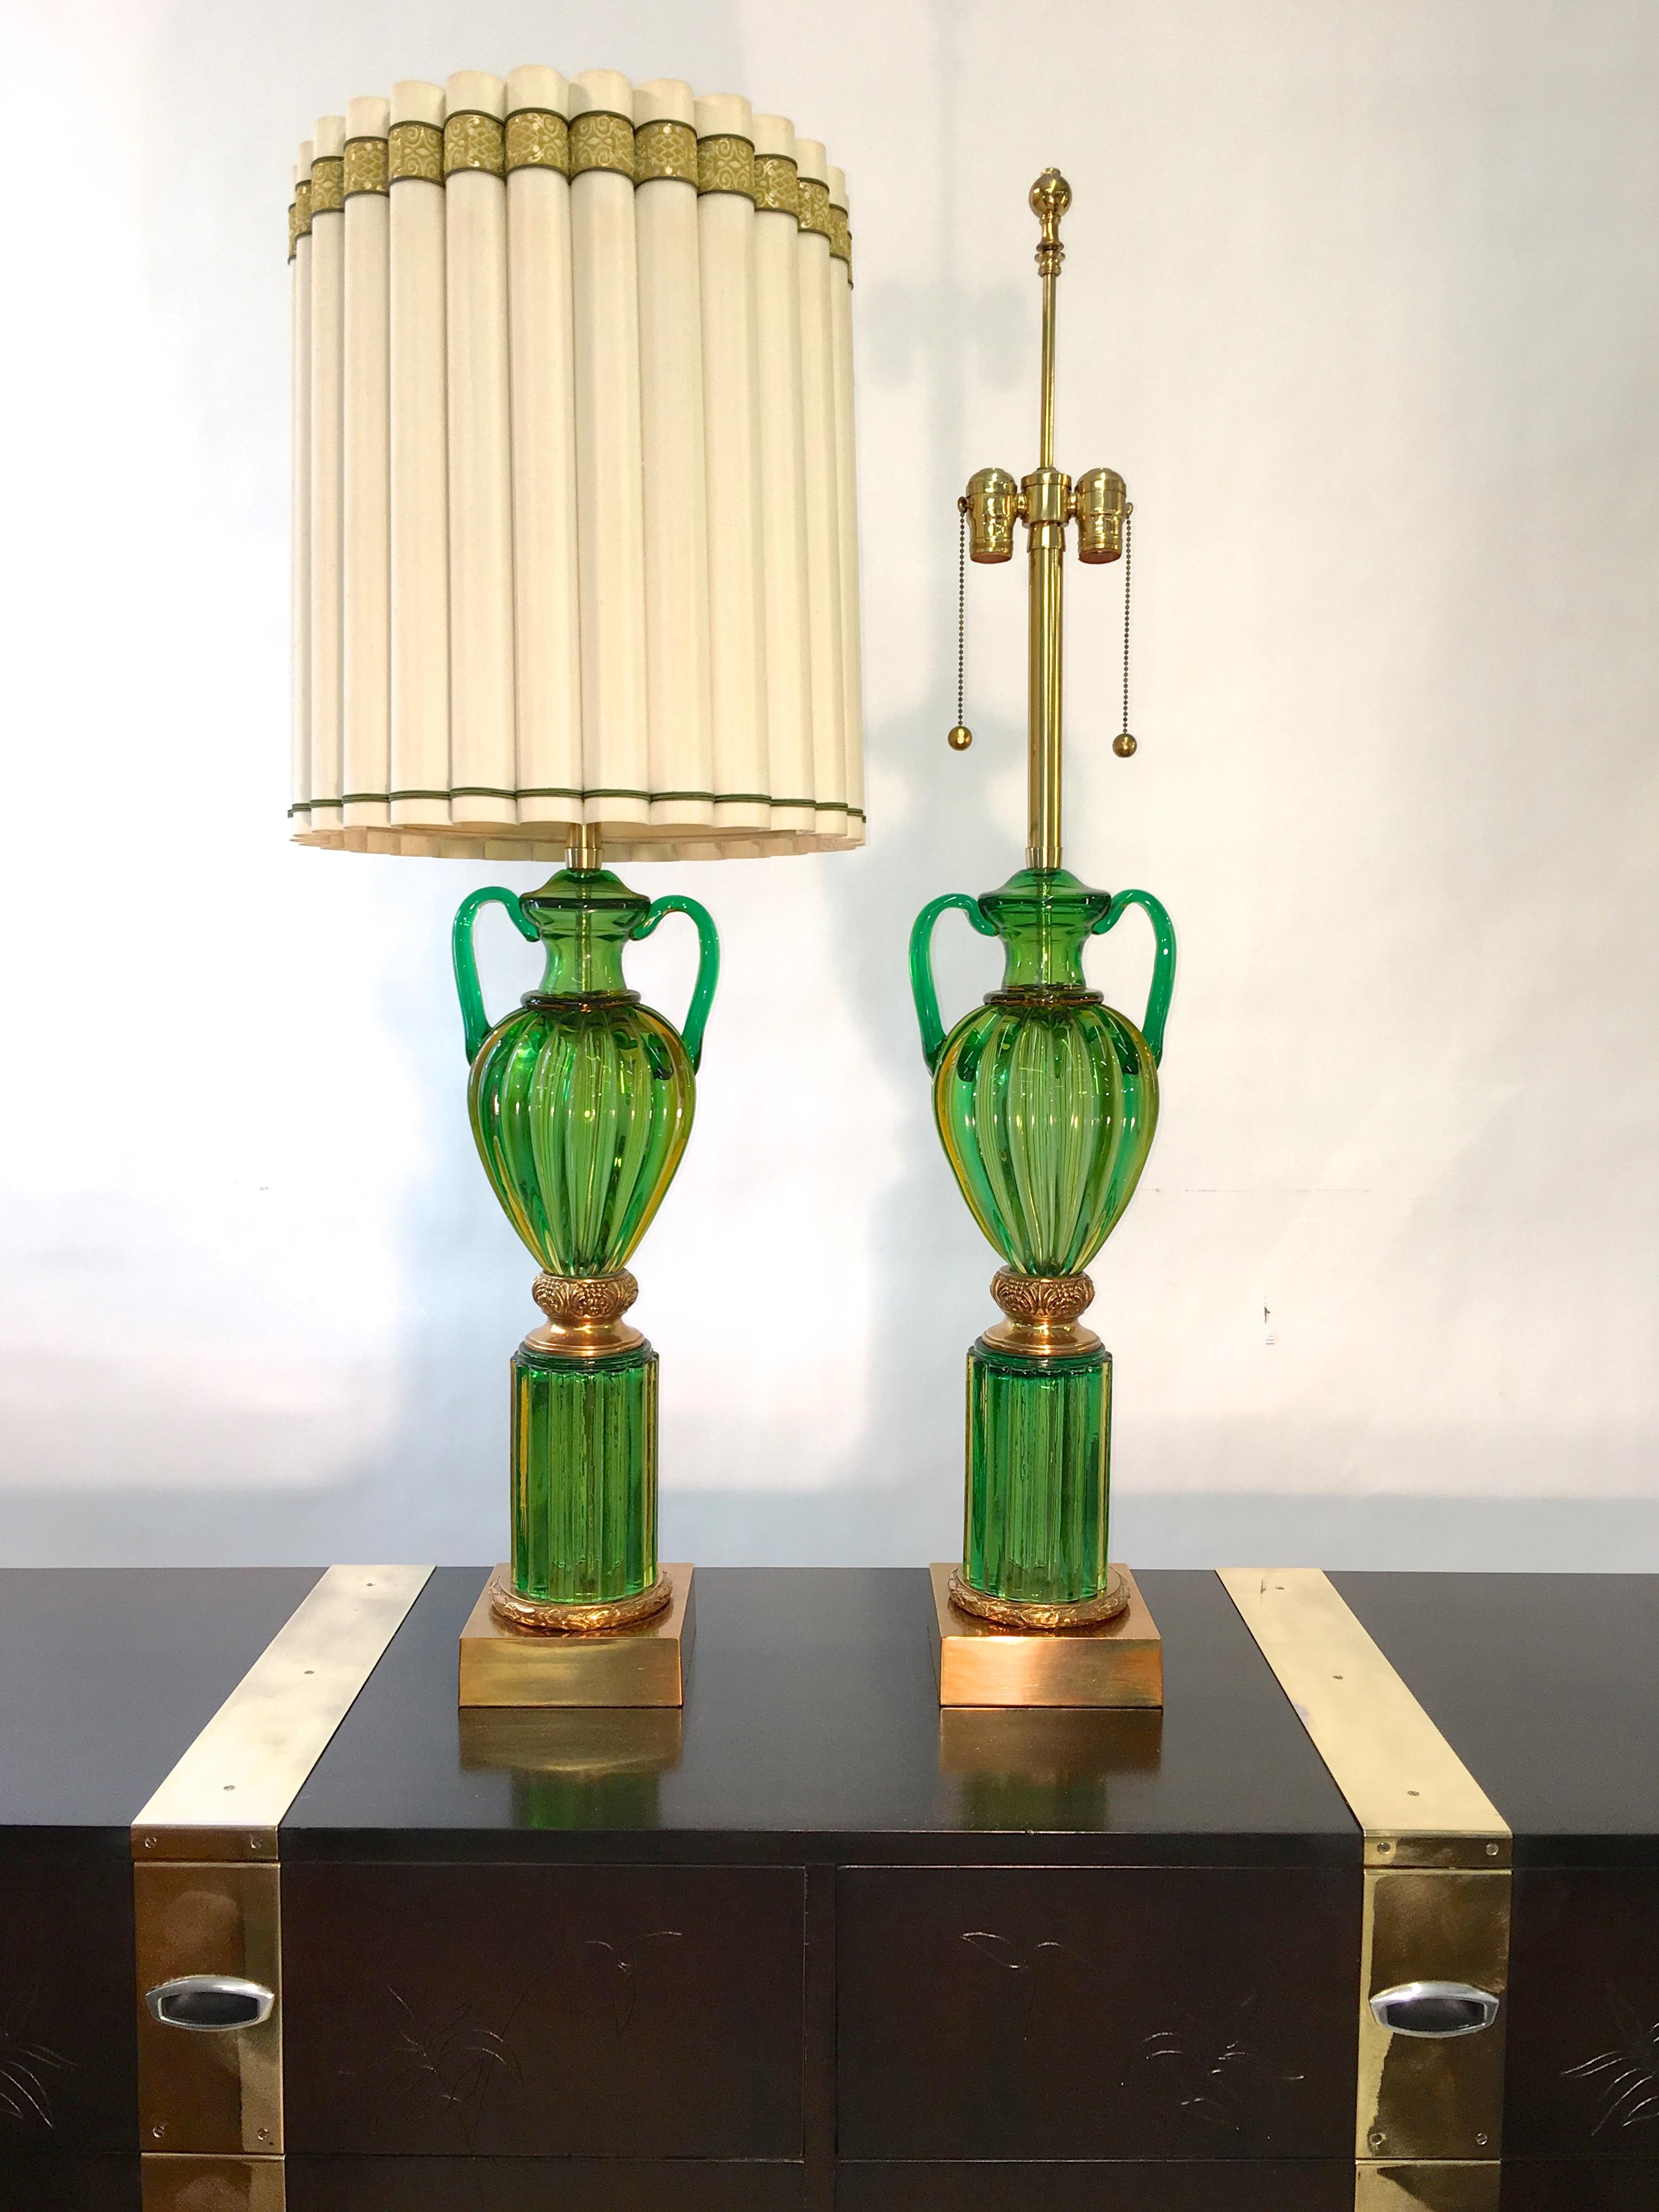 Monumental pair of table lamps as fresh as when they were first made in the 1960s by Marbro Lamp Co with imported emerald green Seguso Murano glass and polished brass fittings.

44 inches high to top of finials. 35 inches high to top of